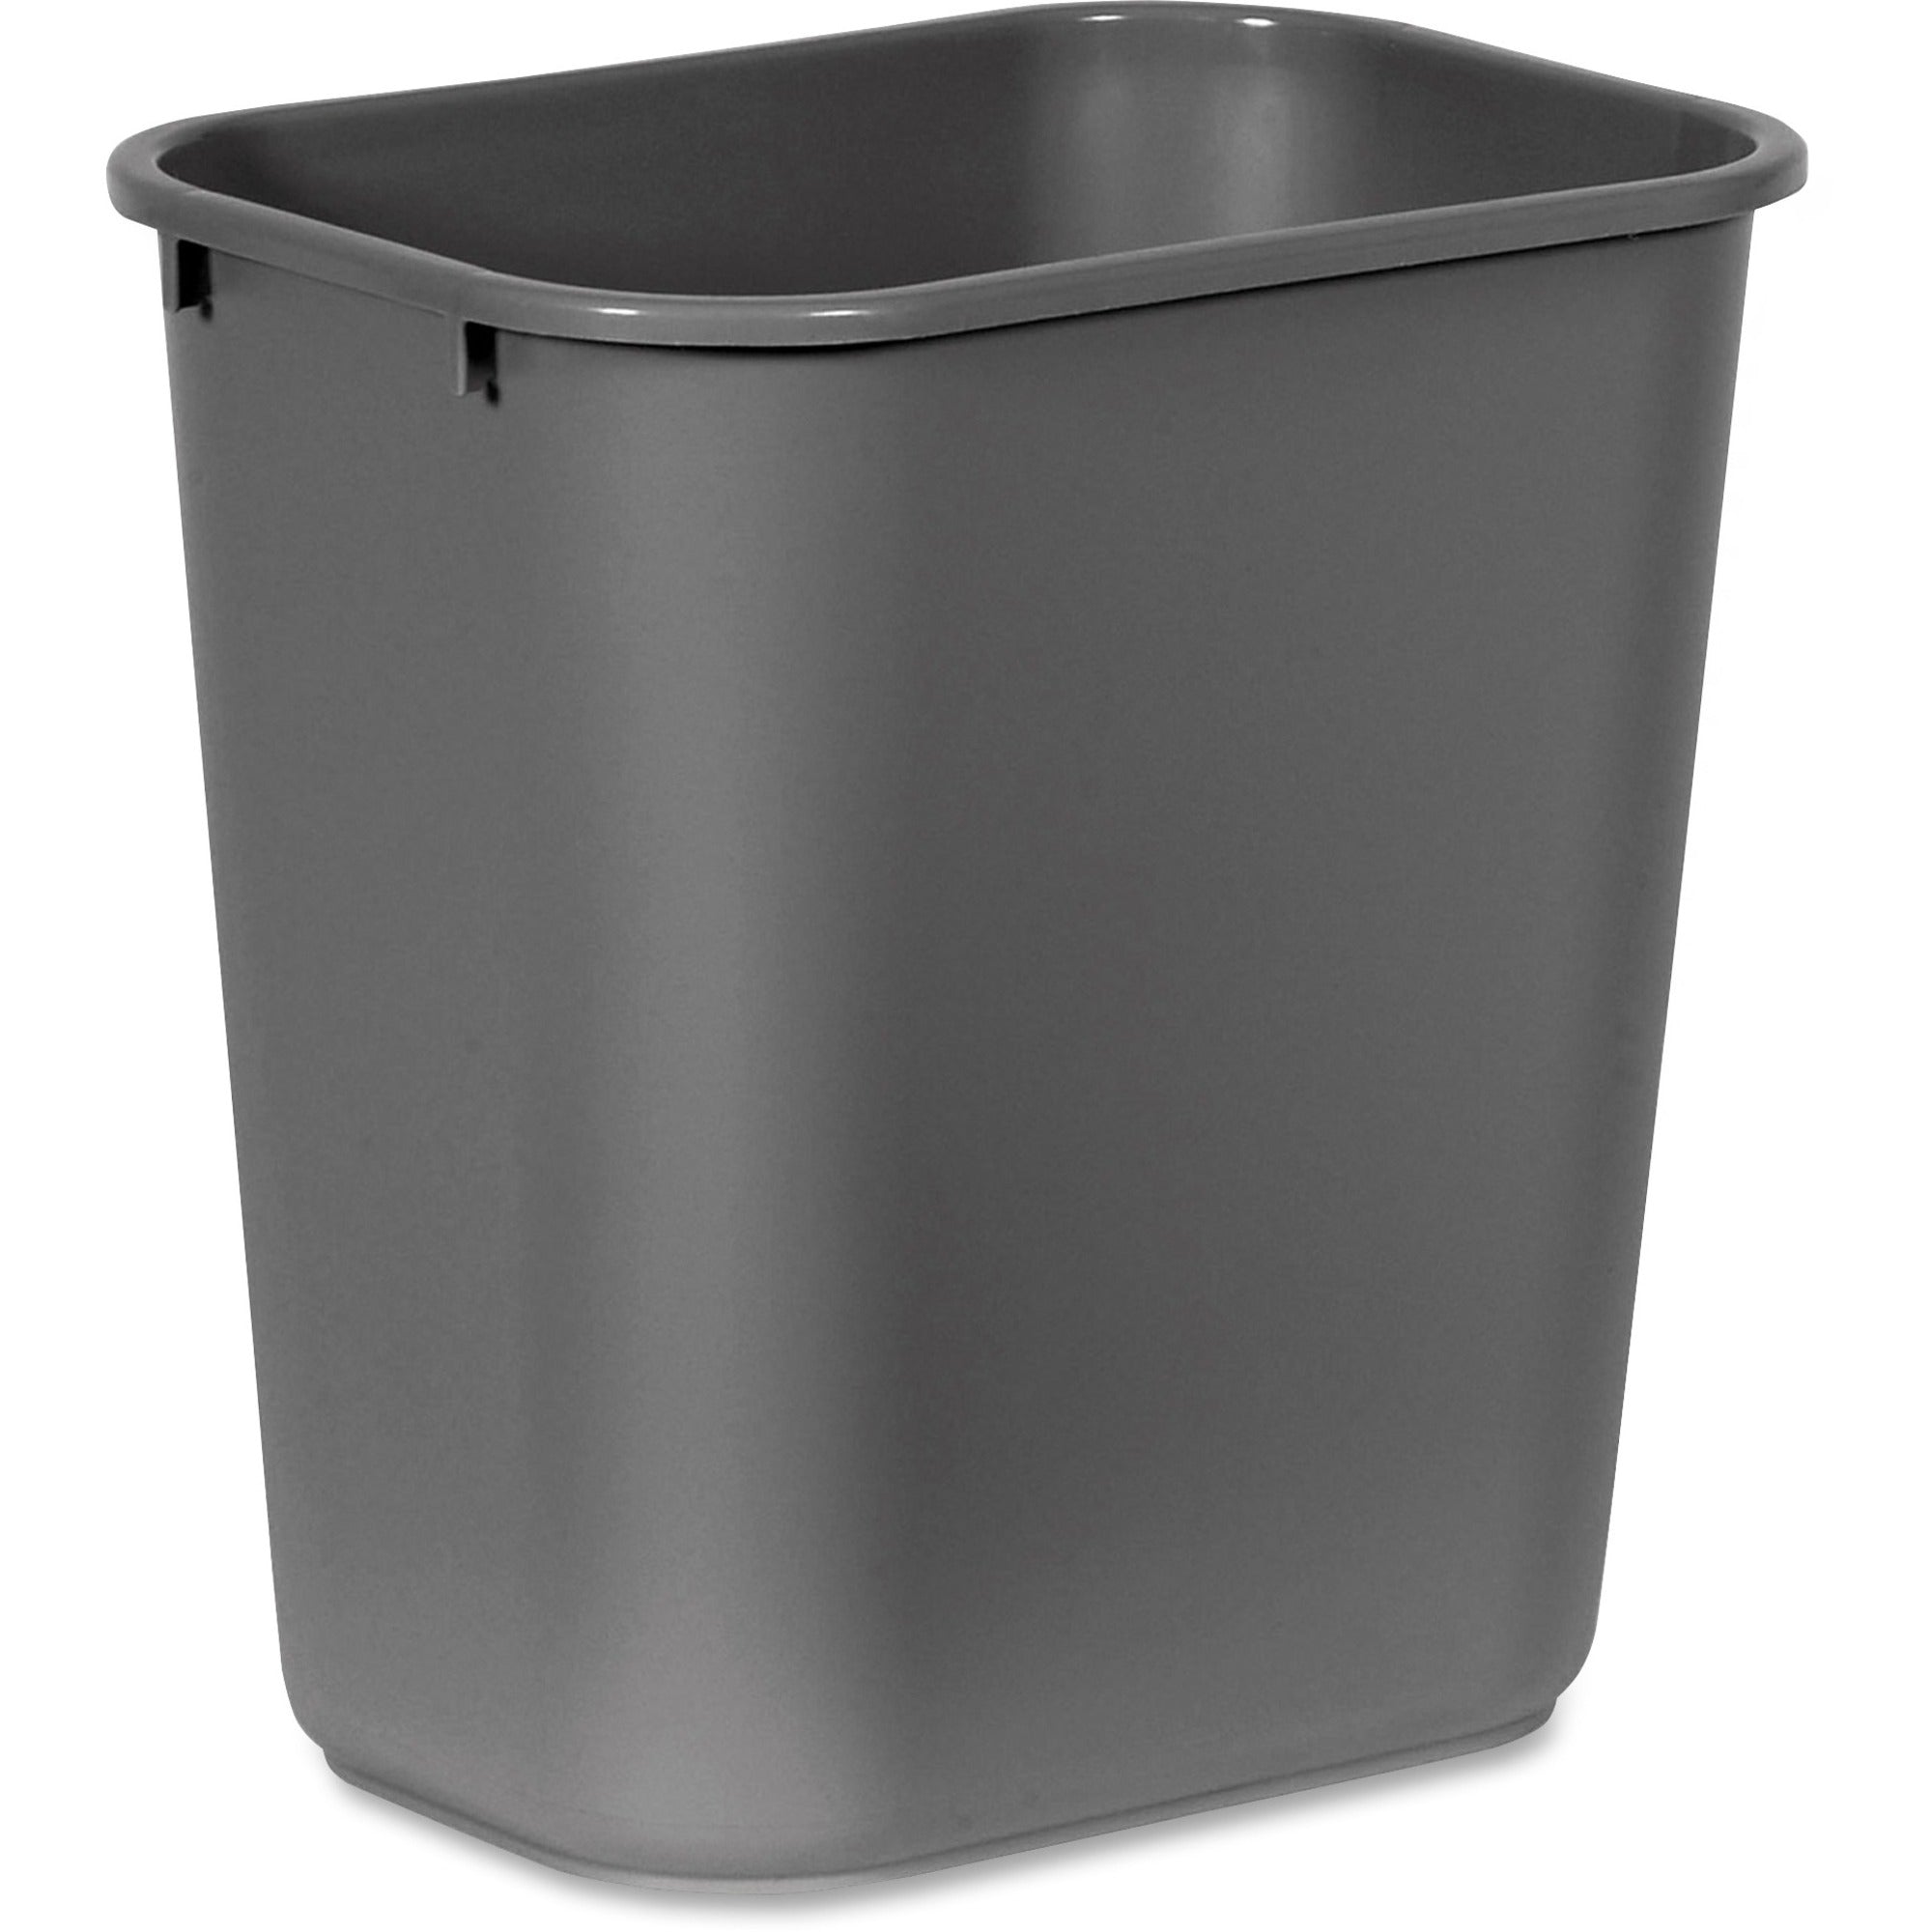 rubbermaid-commercial-28-qt-medium-deskside-wastebaskets-7-gal-capacity-rectangular-dent-resistant-durable-rust-resistant-easy-to-clean-15-height-x-105-width-x-145-depth-plastic-gray-12-carton_rcp295600gyct - 1